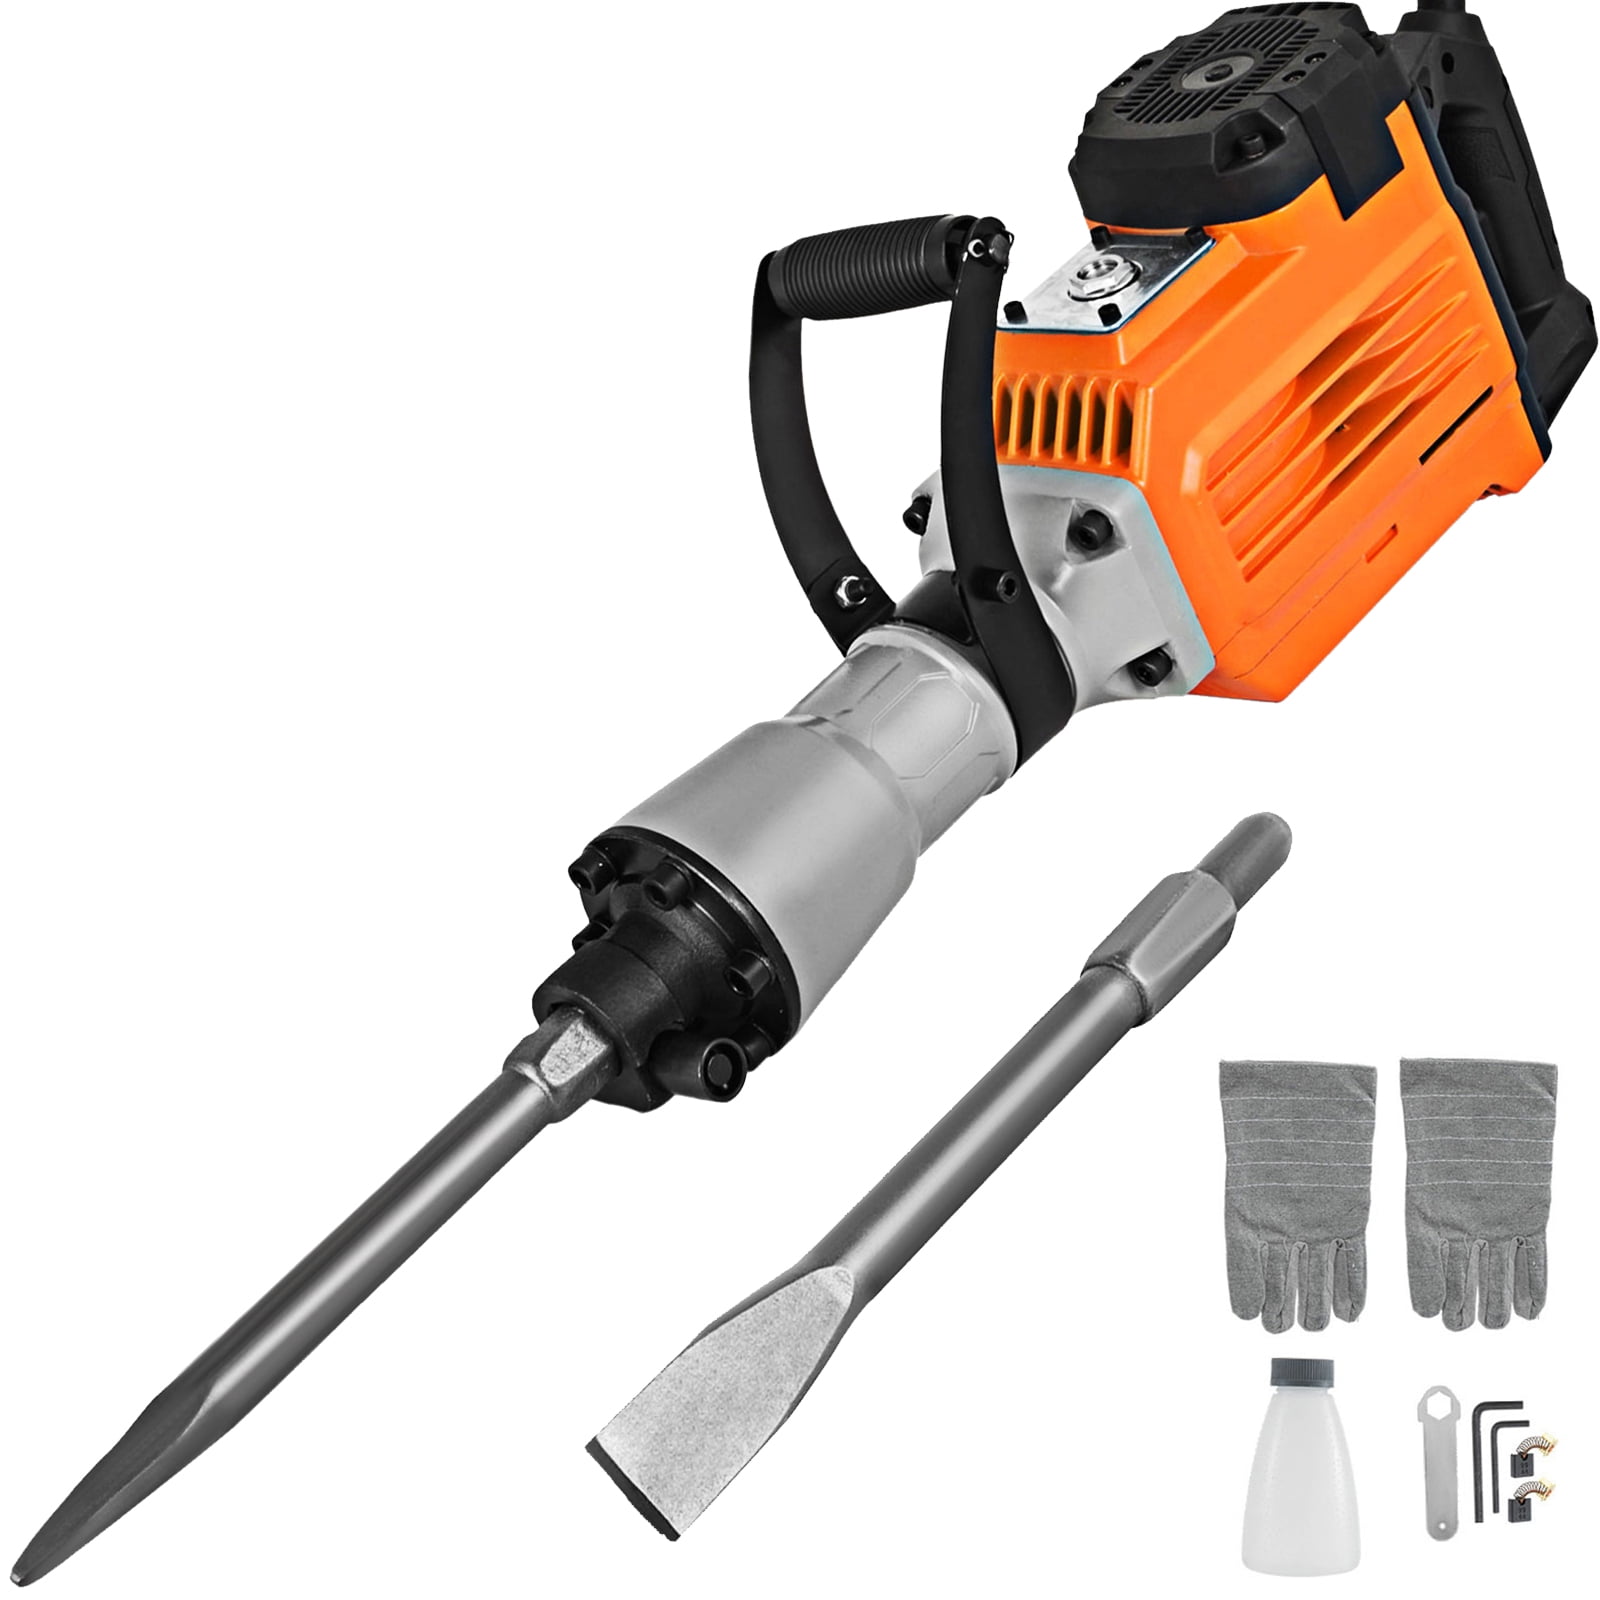 Electric Rotary Demolition Jack Hammer Impact Drill Concrete Breaker+2x bettery 